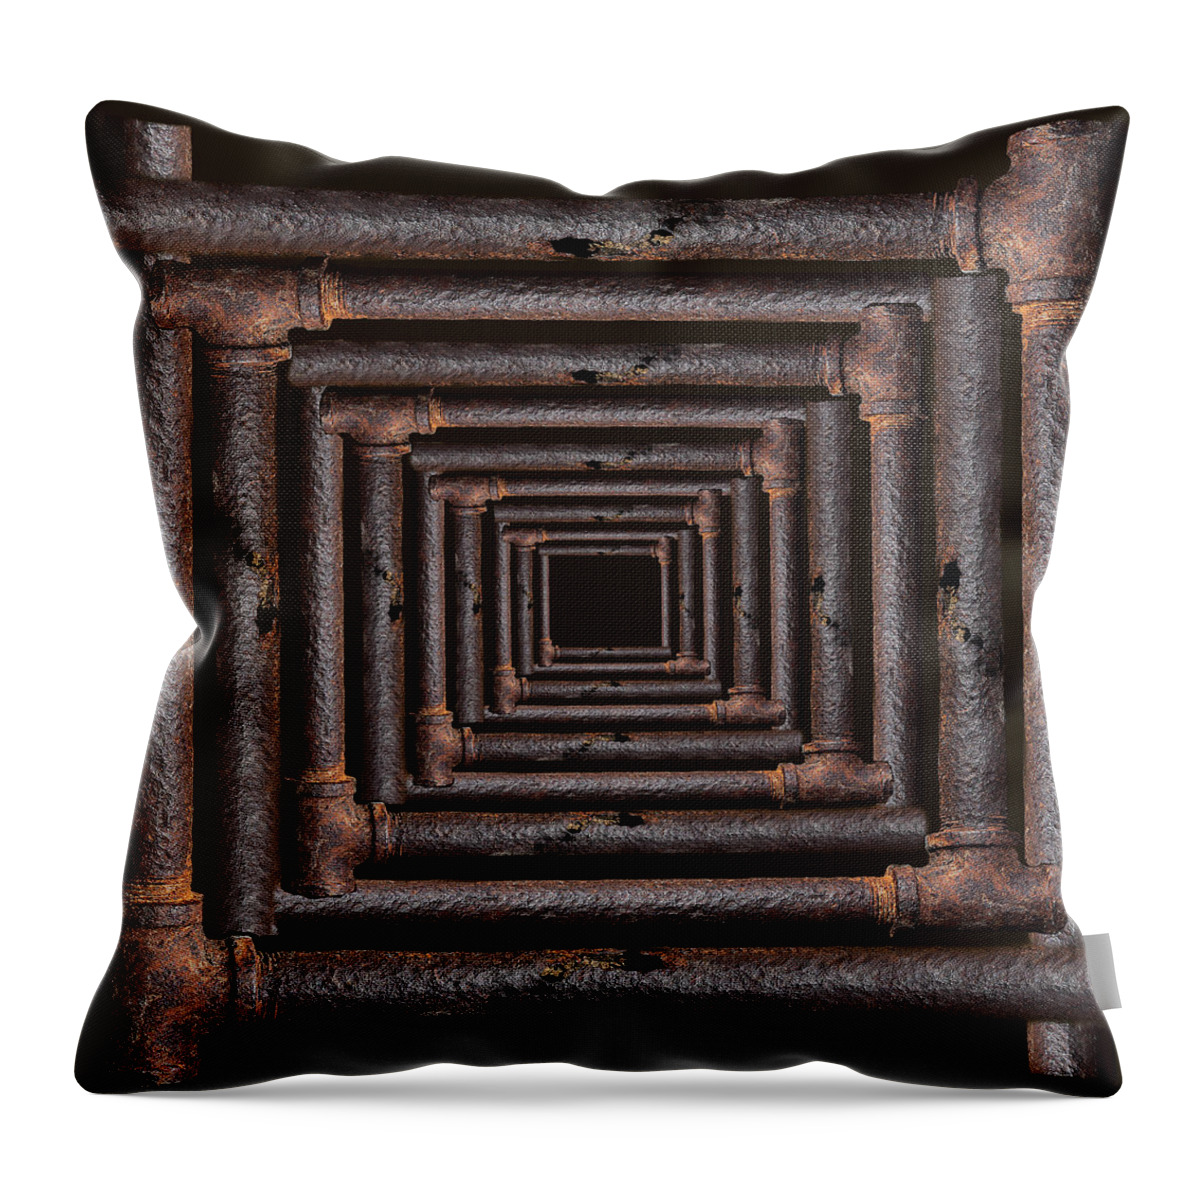 Old Rusty Pipes Throw Pillow featuring the mixed media Old Rusty Pipes by Viktor Savchenko